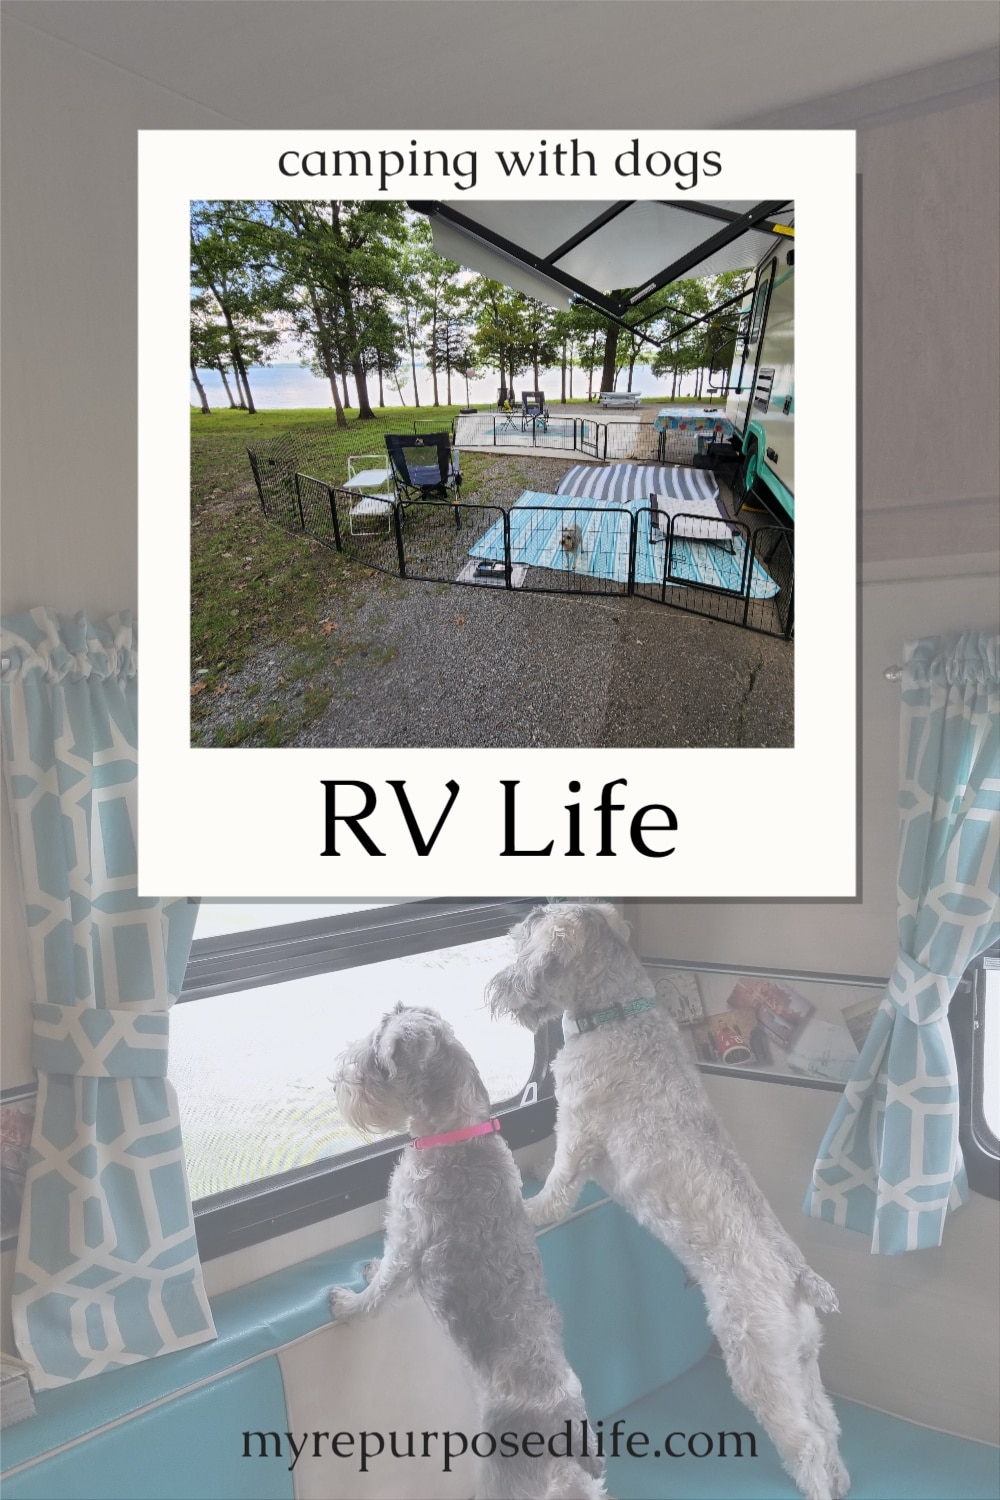 Camping with dogs can be quite rewarding, having man's (woman's) best friend along for the ride. Some aspects can be challenging, I'm here to help you with tips and tricks I've learned along the way. Lots of ideas to improve your experience. #RV #myrepurposedlife via @repurposedlife